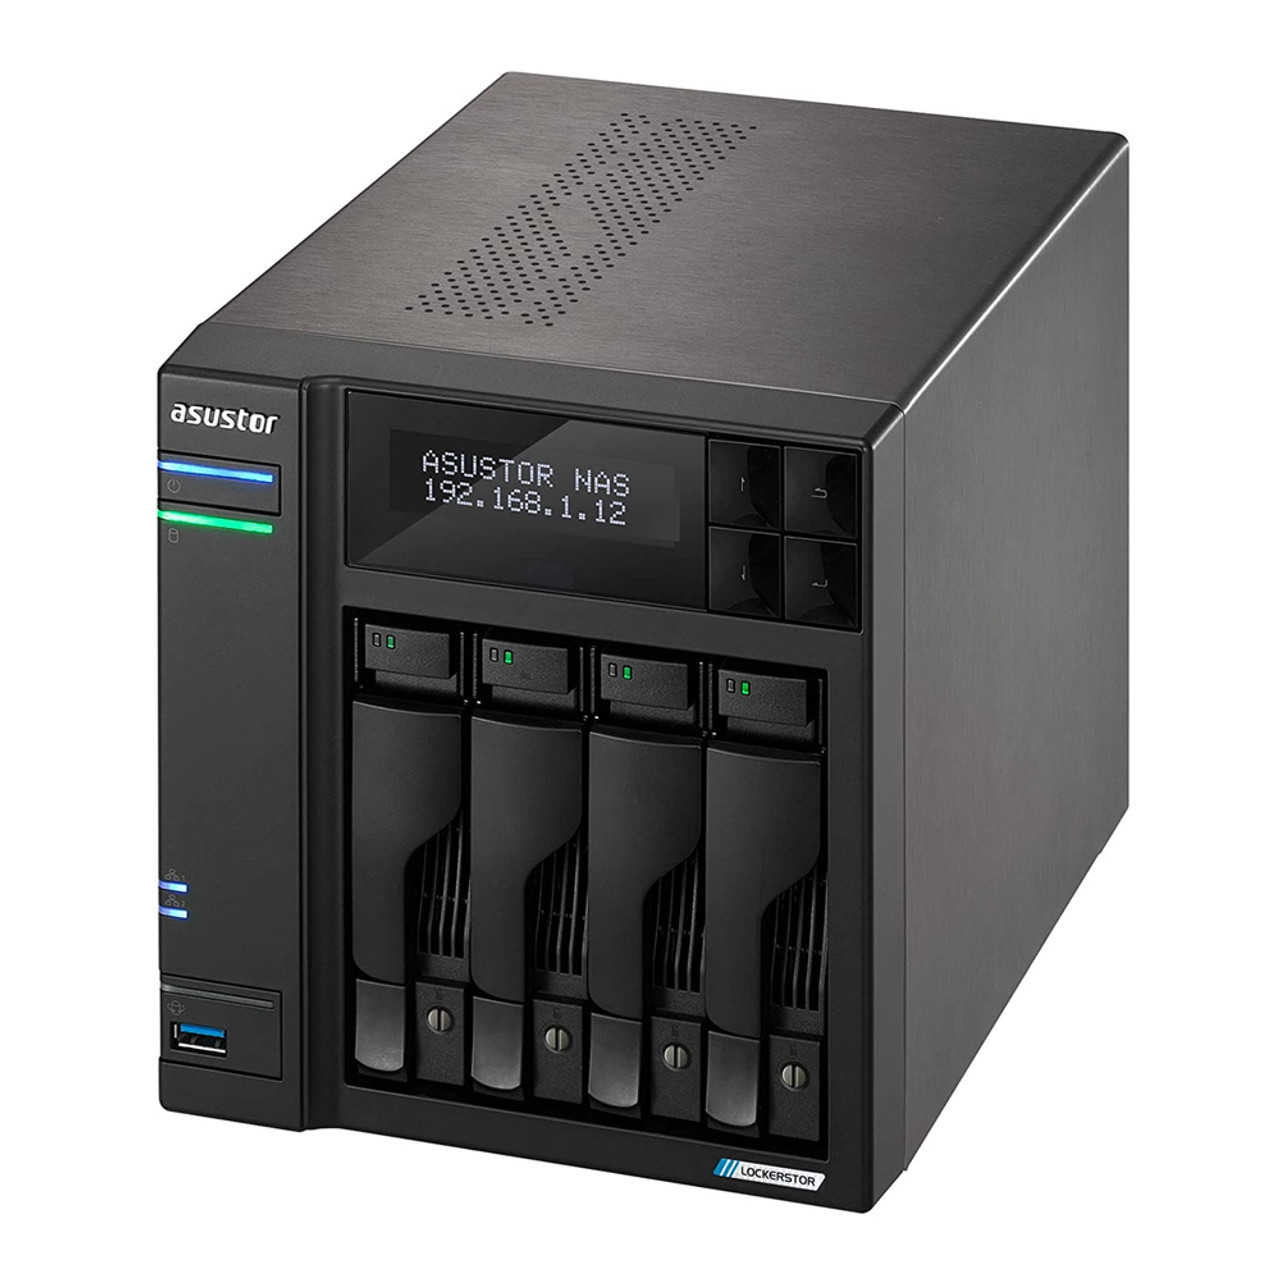 Asustor AS6704T LOCKERSTOR 4 Gen2, Small Business 4-Bays NAS, Quad-Core CPU, Dual 2.5/10GbE Port, 4GB DDR4 RAM, Network Attached Storage (Diskless)